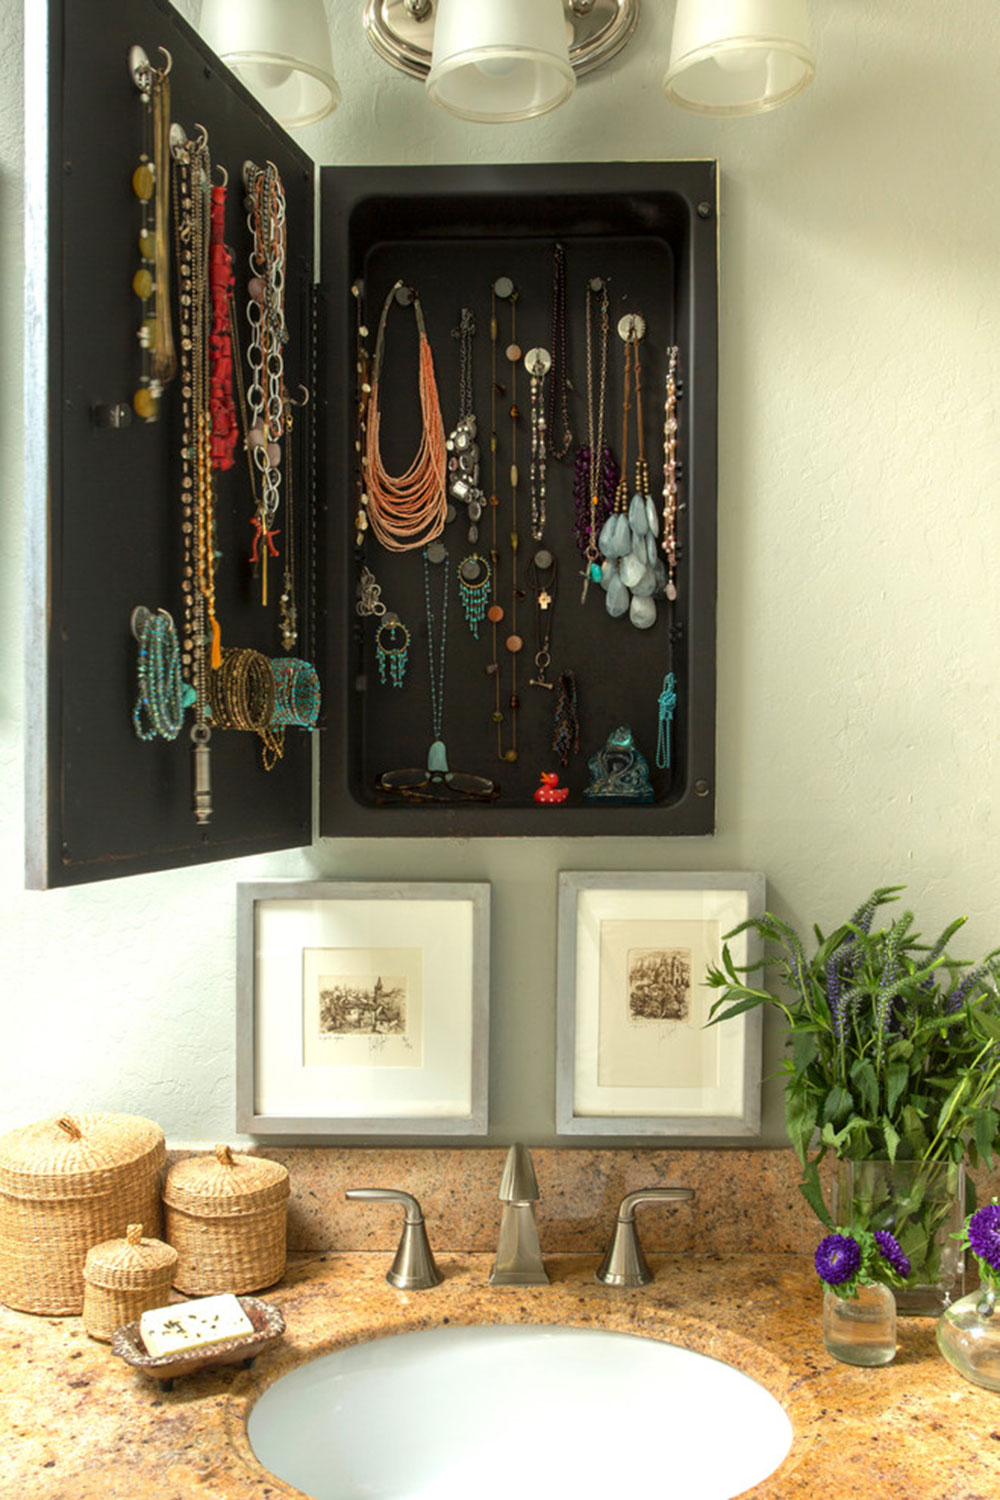 My-Houzz-A-1941-DIY-Cottage-Update-Aided-by-a-Lending-Library-by-Margot-Hartford-Photography Small bathroom storage ideas you shouldn’t neglect